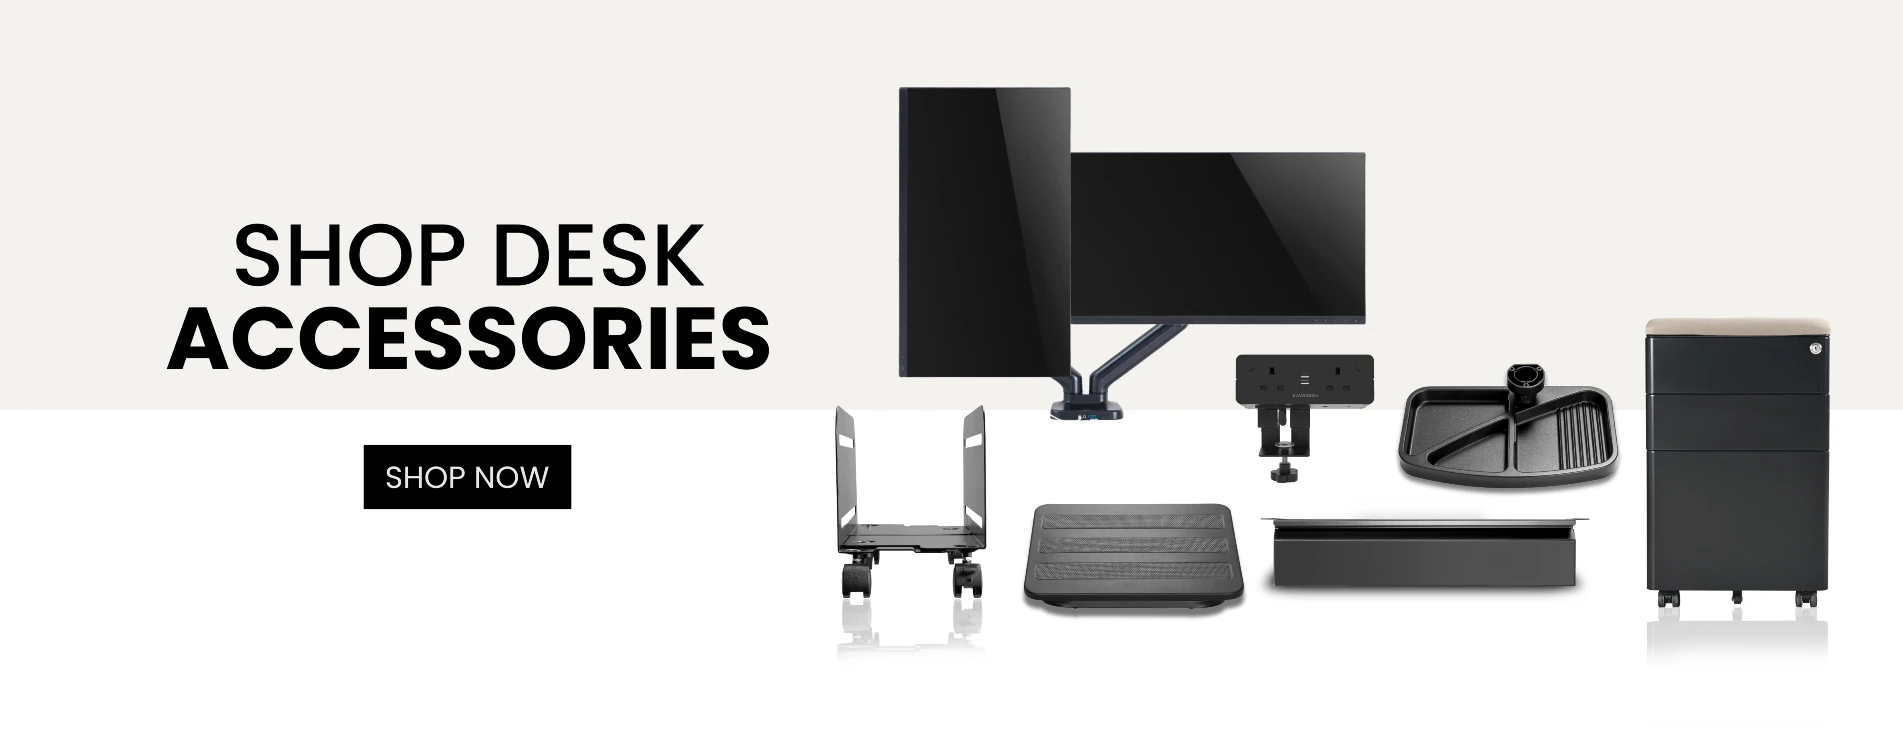 Navodesk Accessories Home Page Banner